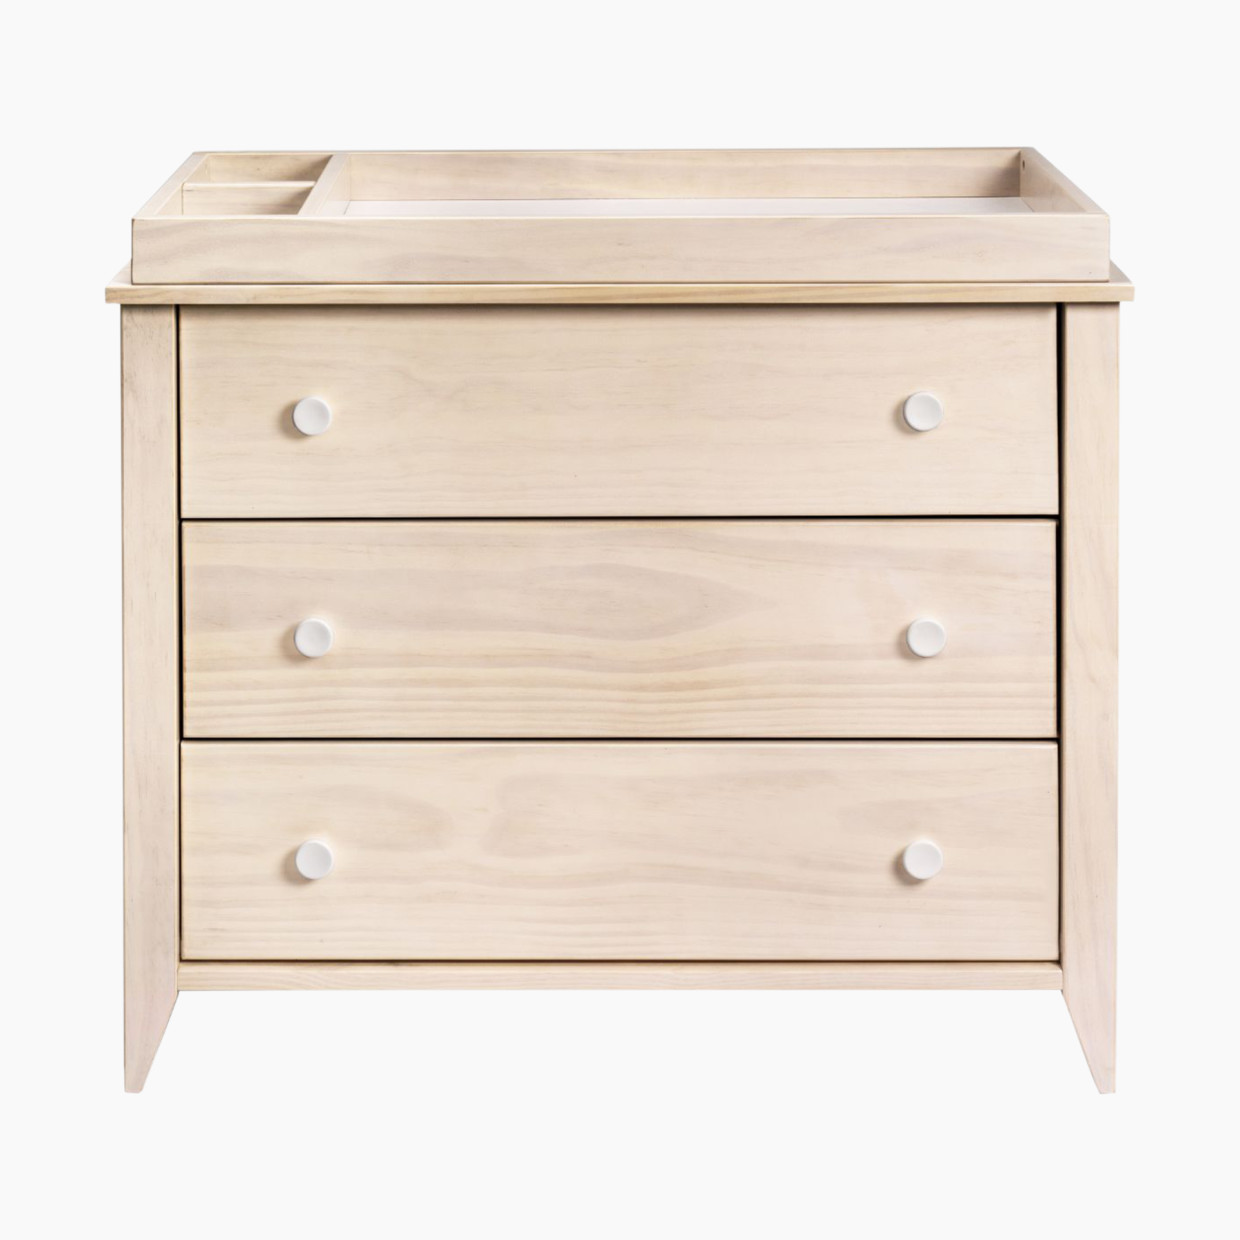 babyletto Sprout 3-Drawer Changer Dresser - Washed Natural/White.